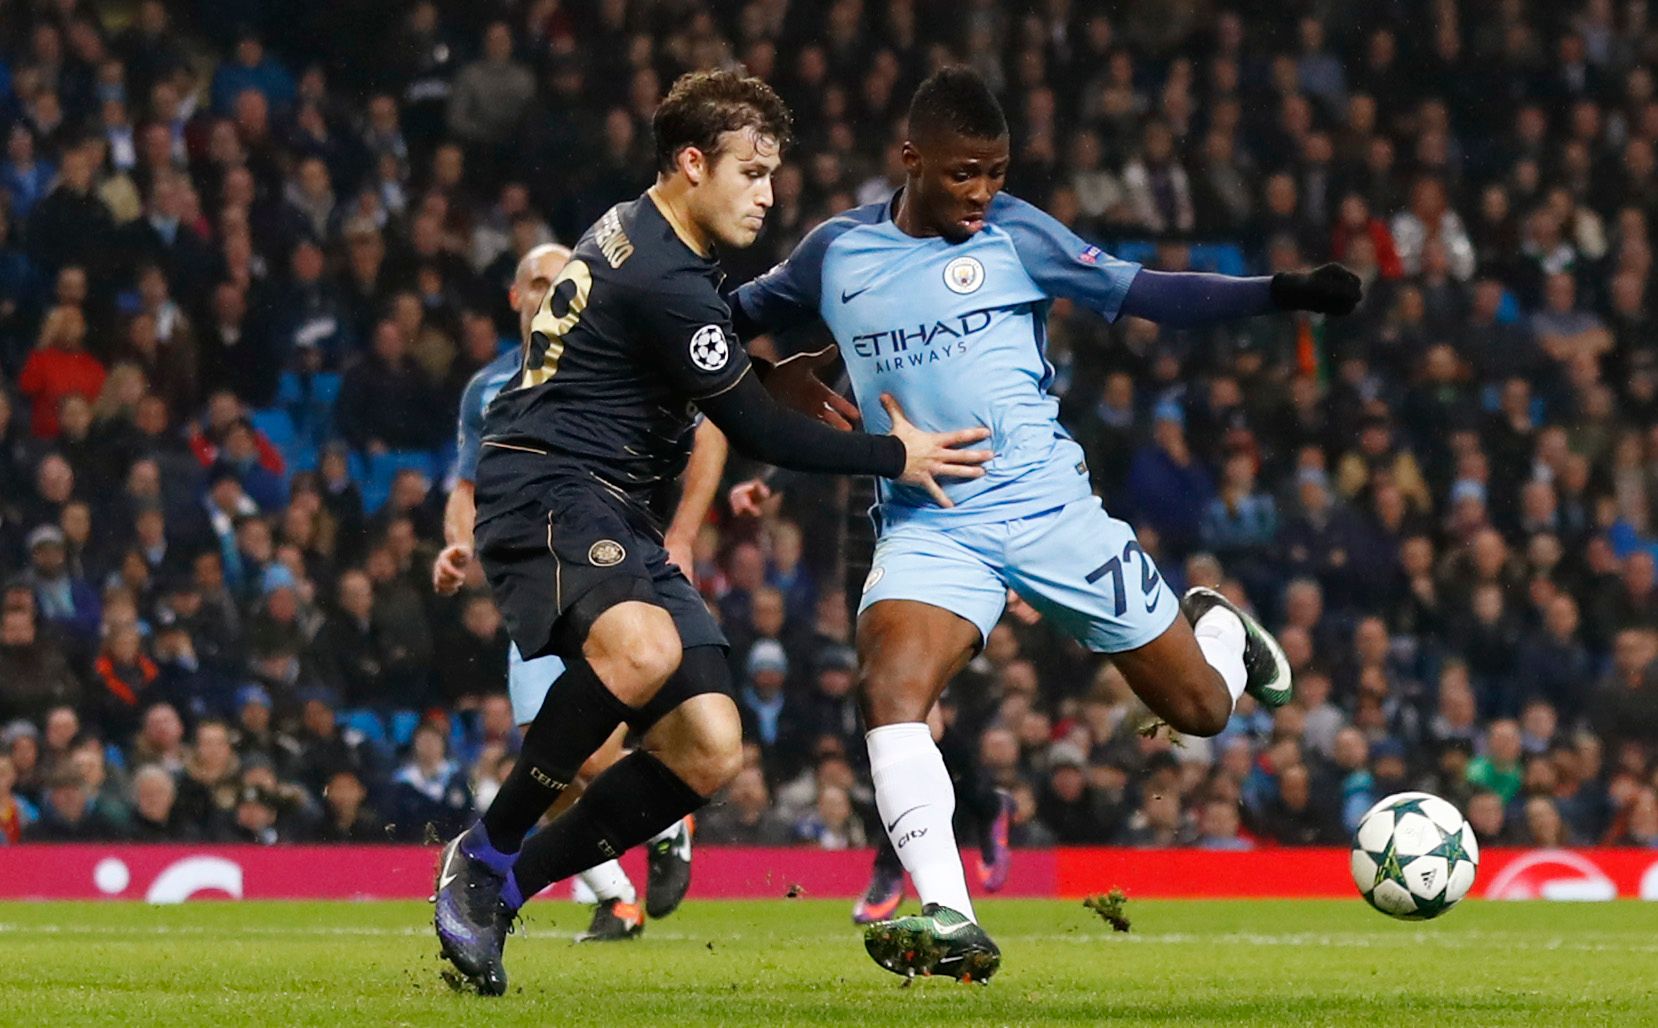 Britain Football Soccer - Manchester City v Celtic - UEFA Champions League Group Stage - Group C - Etihad Stadium, Manchester, England - 6/12/16 Manchester City's Kelechi Iheanacho in action with Celtic's Erik Sviatchenko  Action Images via Reuters / Jason Cairnduff Livepic EDITORIAL USE ONLY.